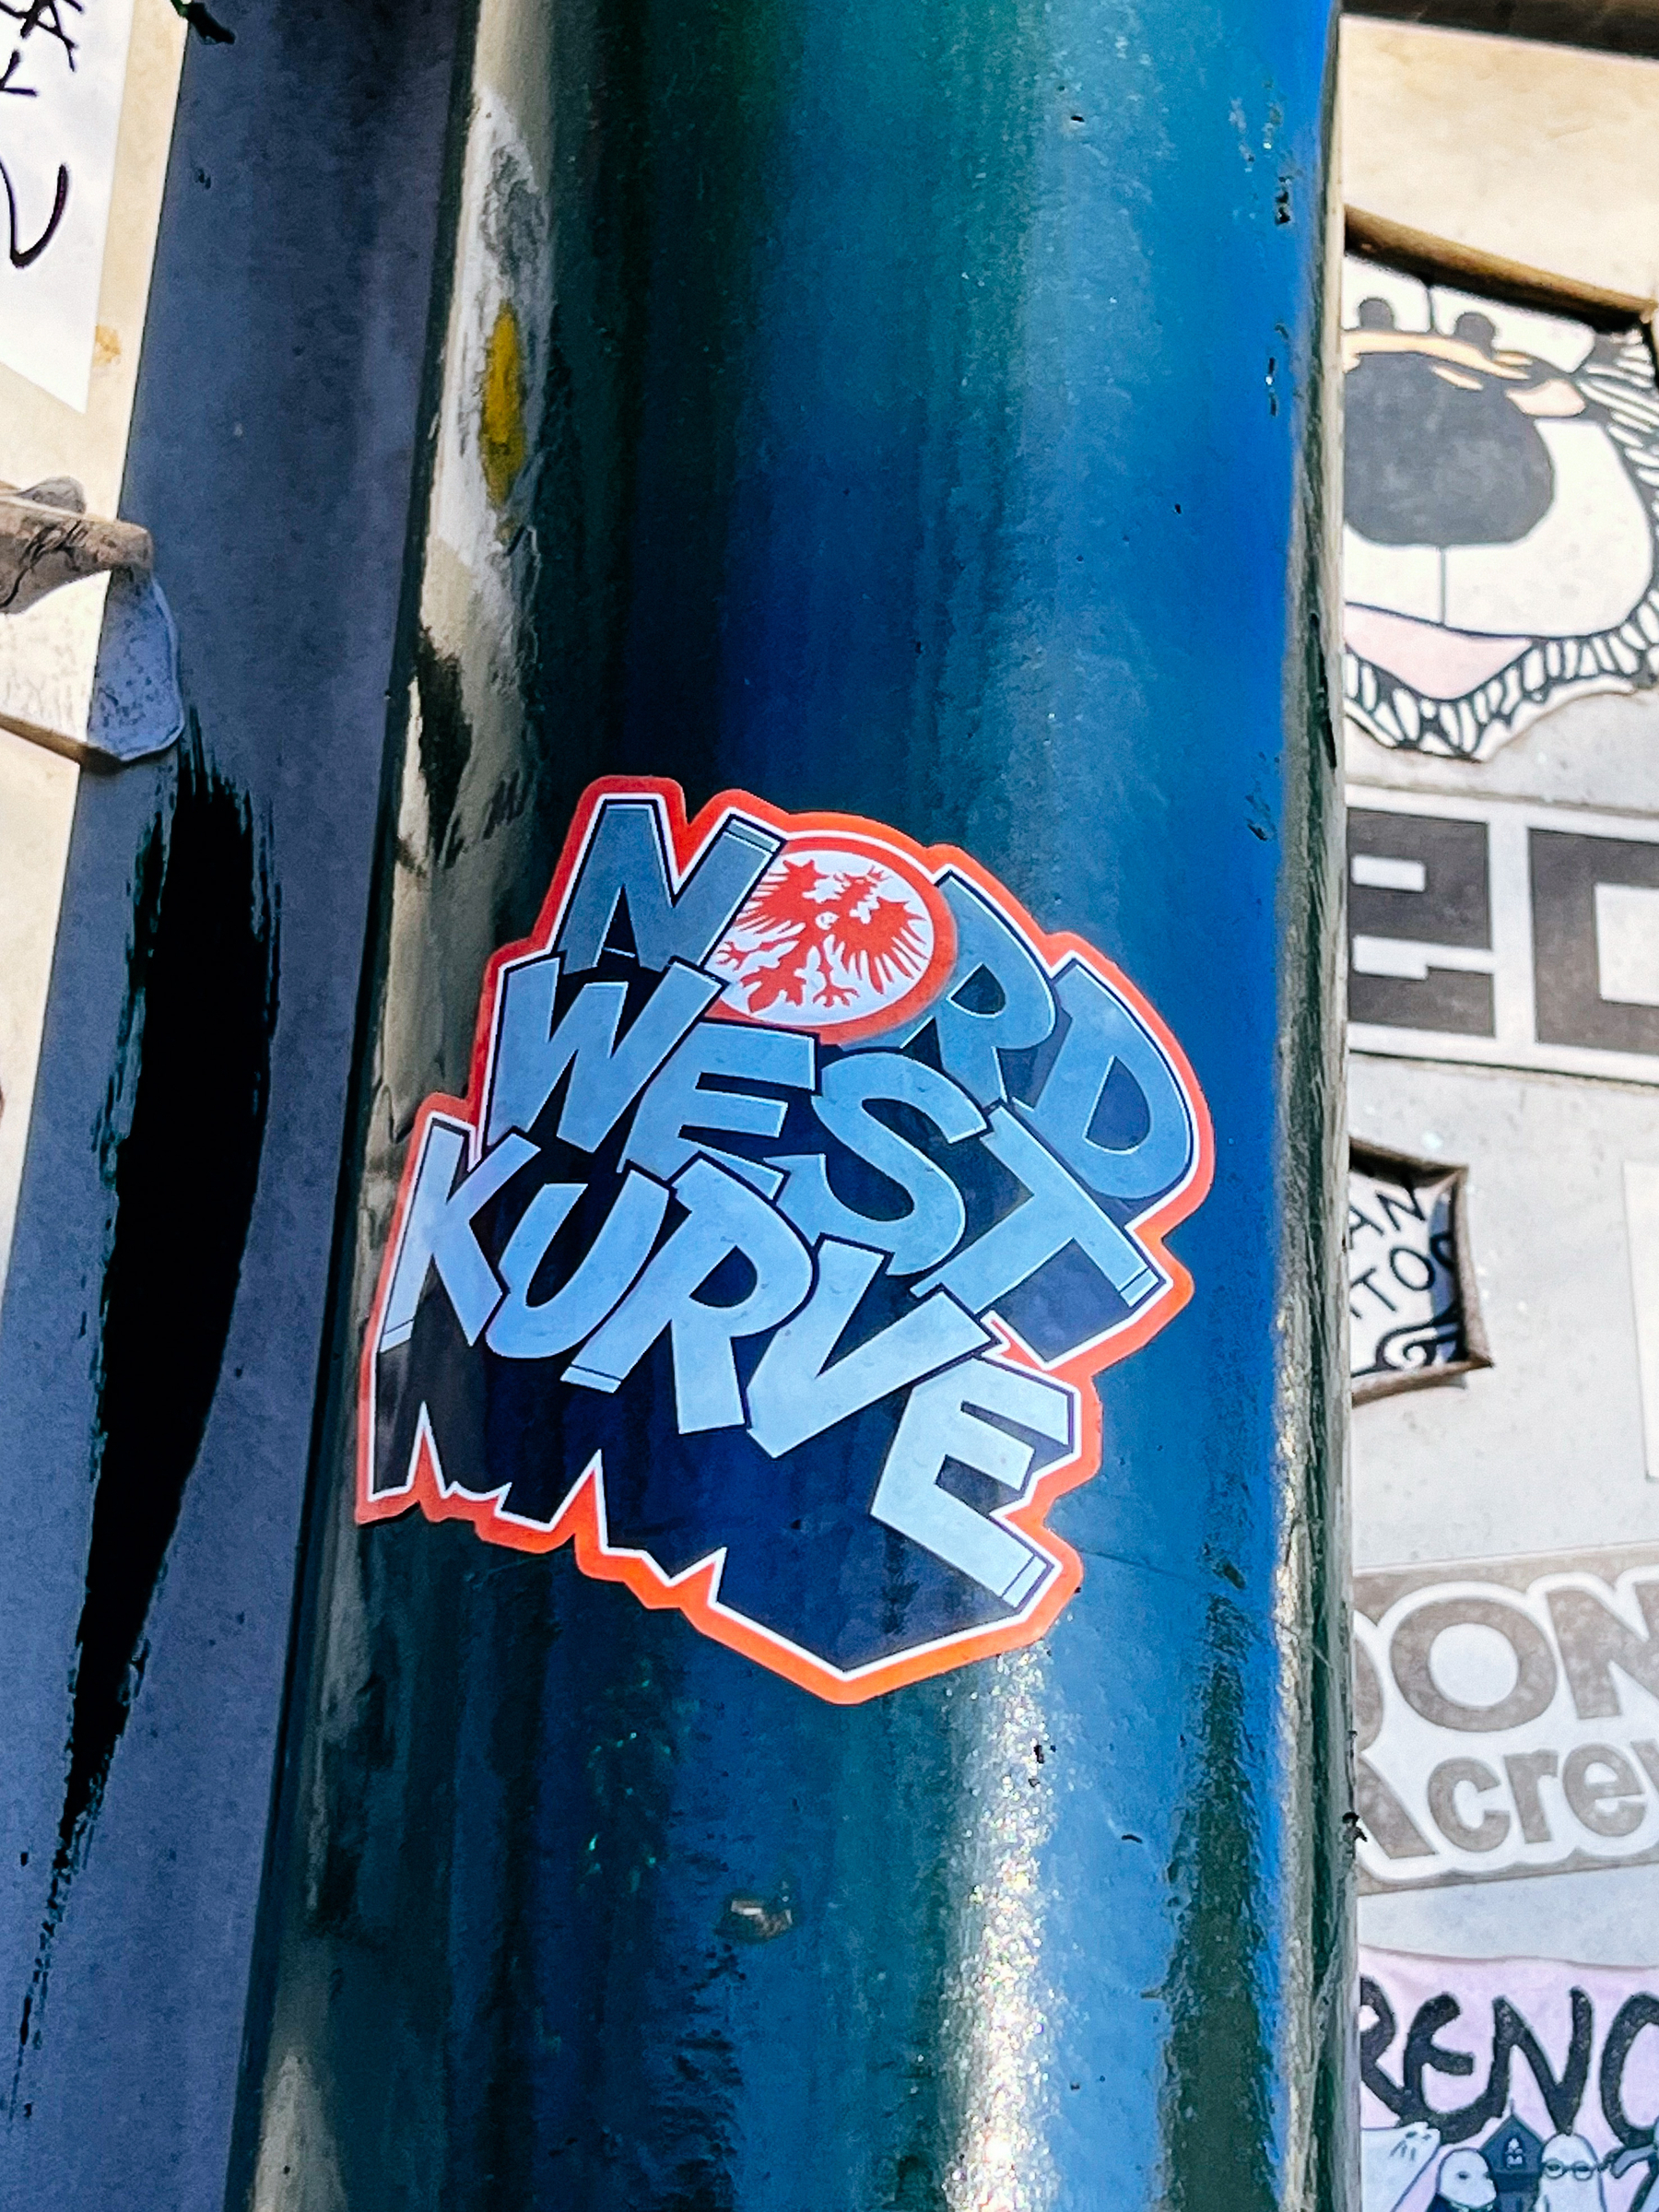 Sticker with the words “Nord West Kurve”. 